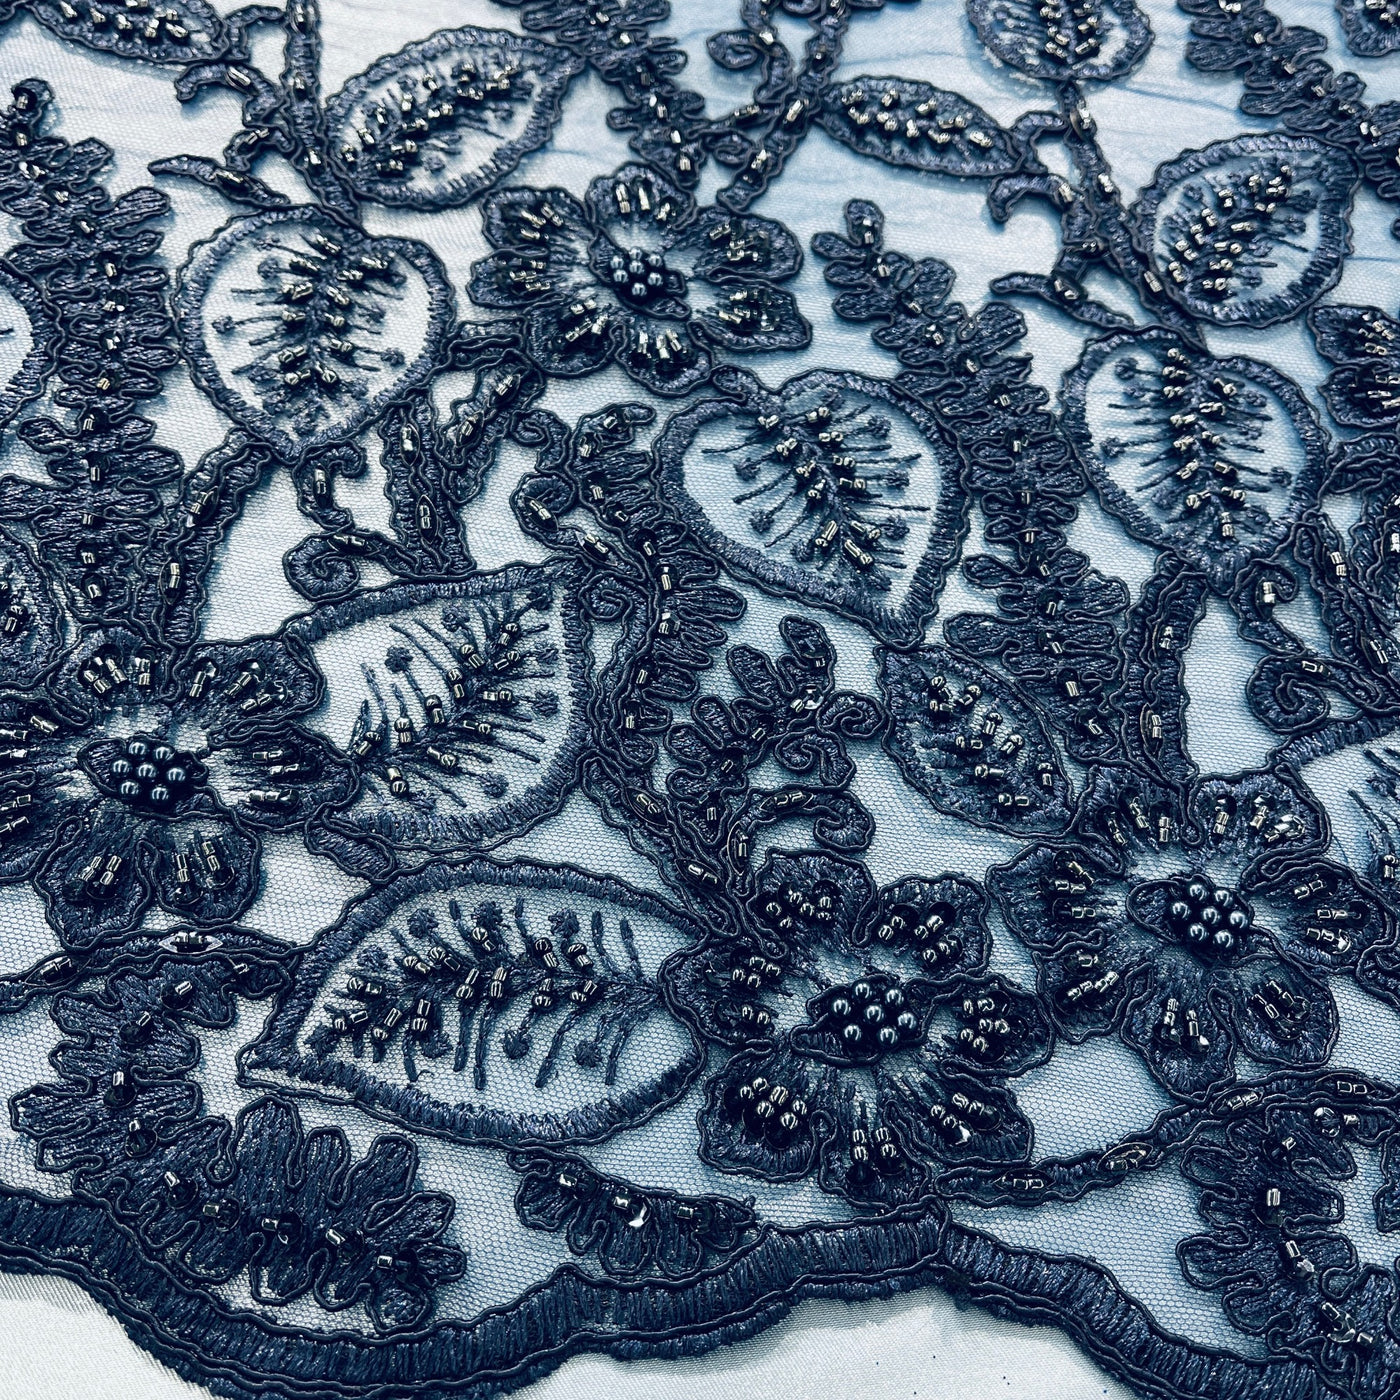 Beaded & Corded Lace Fabric Embroidered on 100% Polyester Net Mesh | Lace USA - GD-1823 Navy